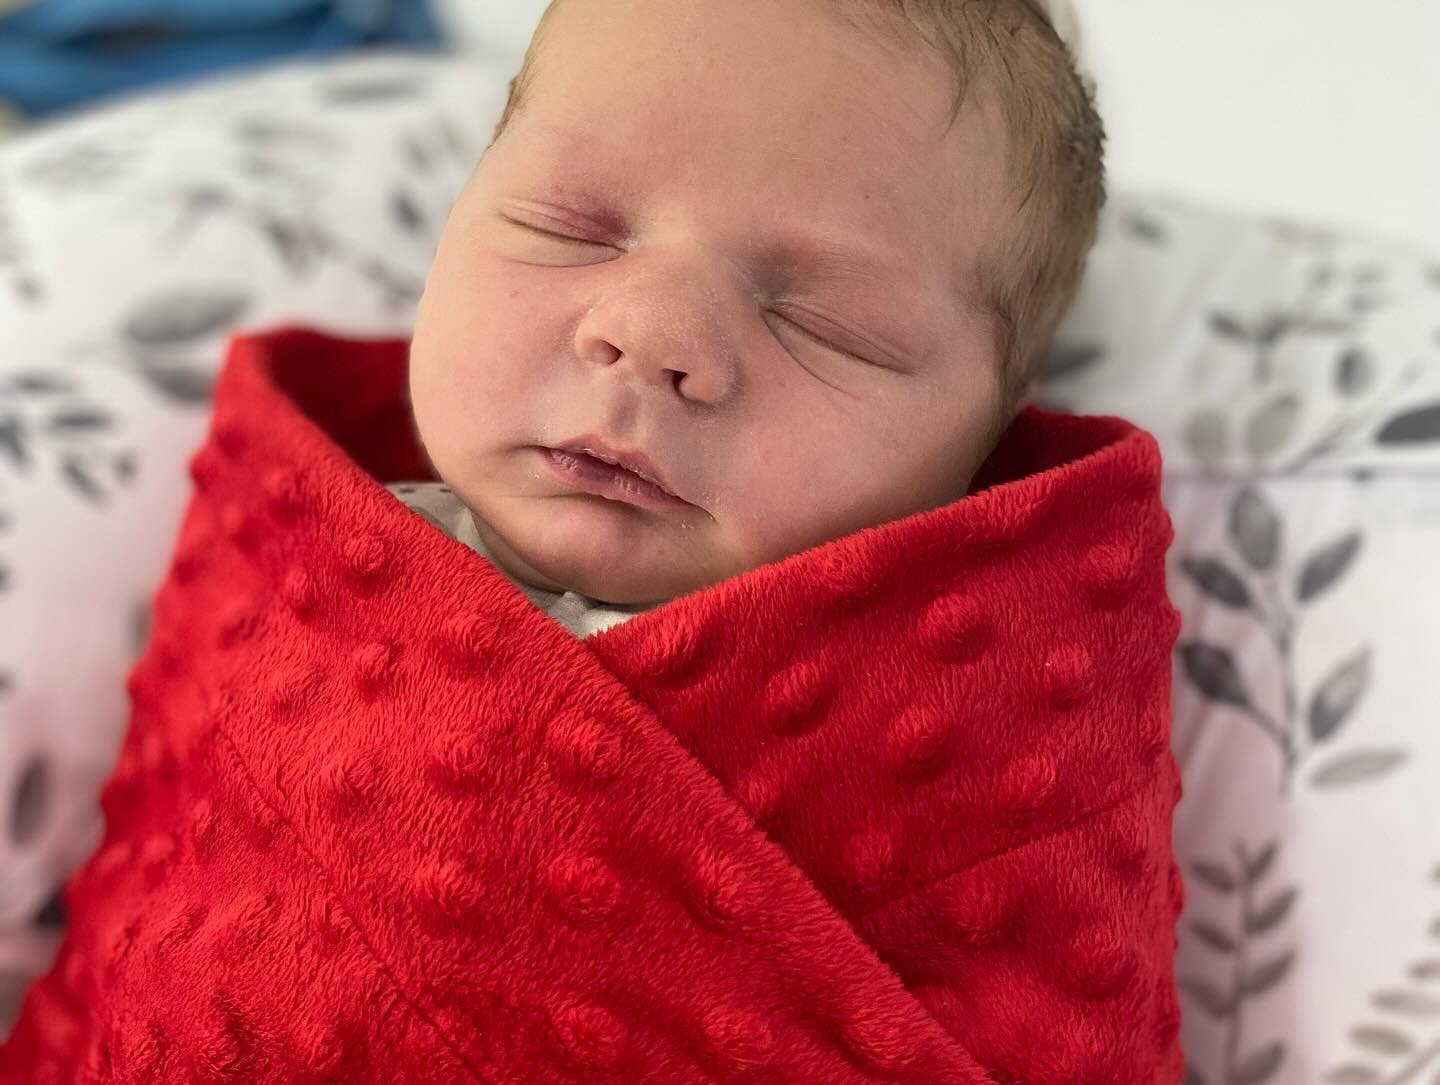 Welcome our newest Binah Baby - Asher Rowan! This &ldquo;little&rdquo; guy surprised EVERYONE with his size (check the next pic for details), including his midwife! 

This birth was his mama&rsquo;s 4th, but first VBAC (AND first homebirth) after a c